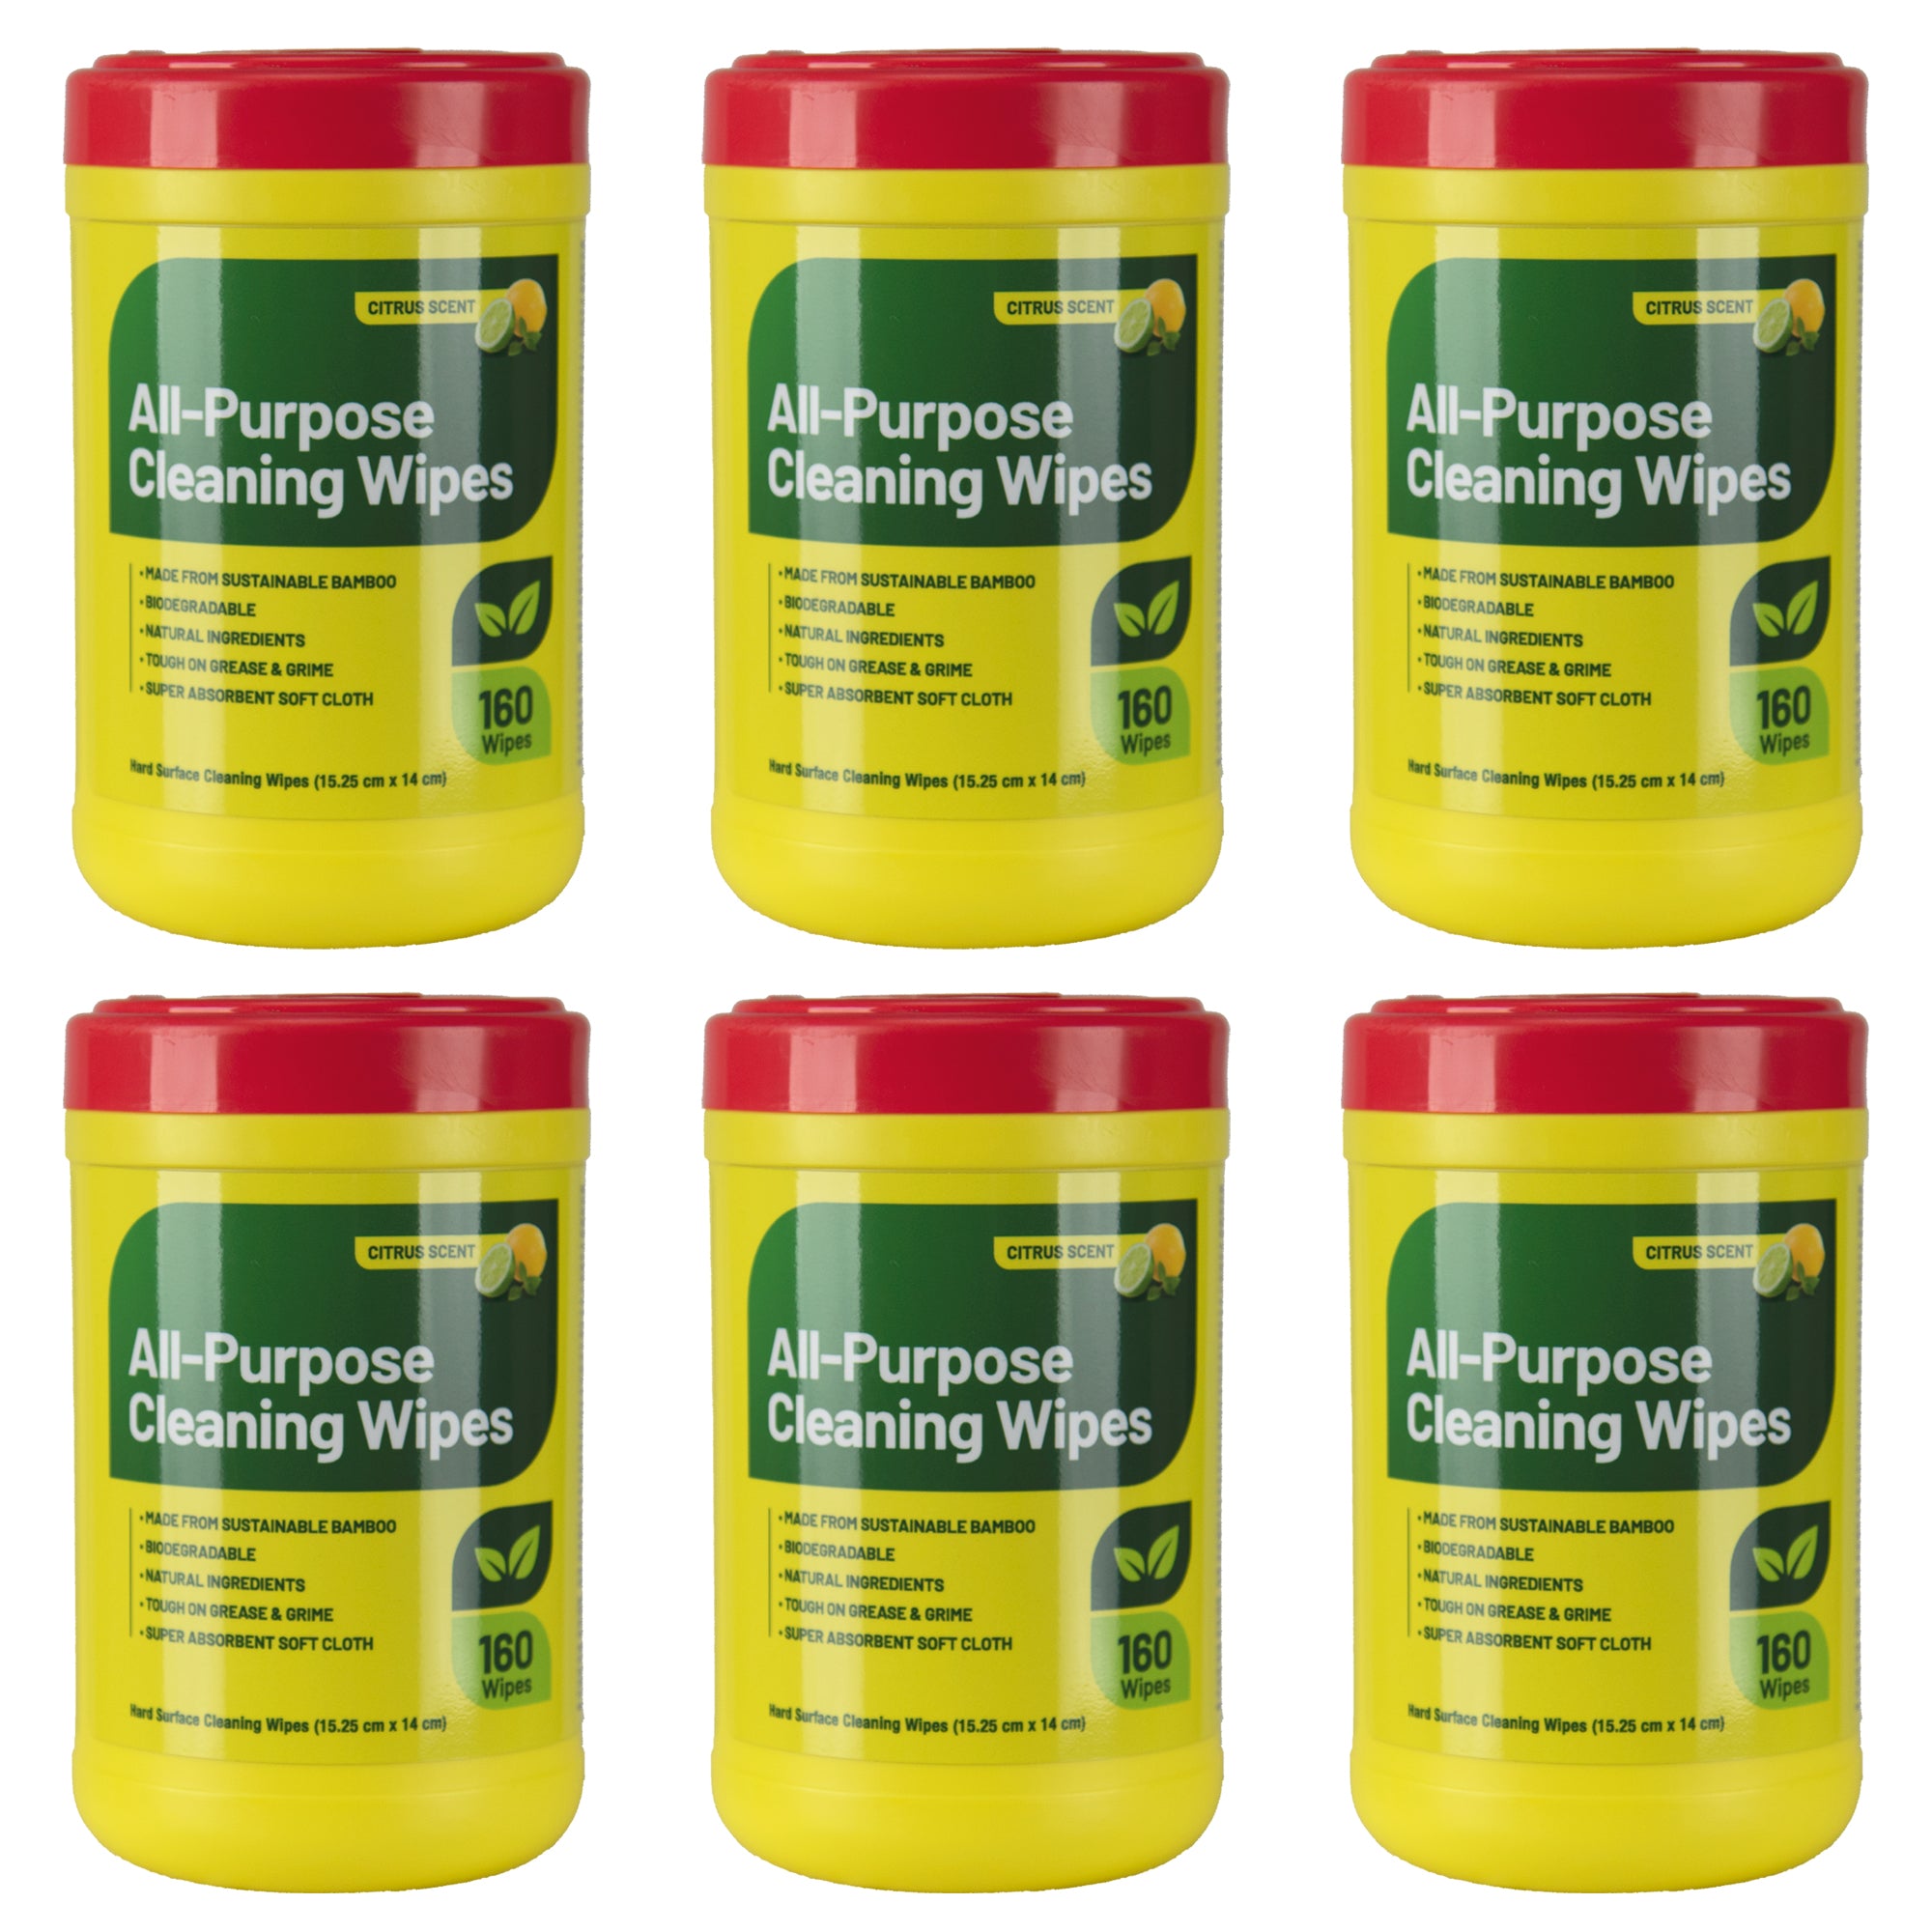 All-Purpose Cleaning Wipes, 160 Wipes